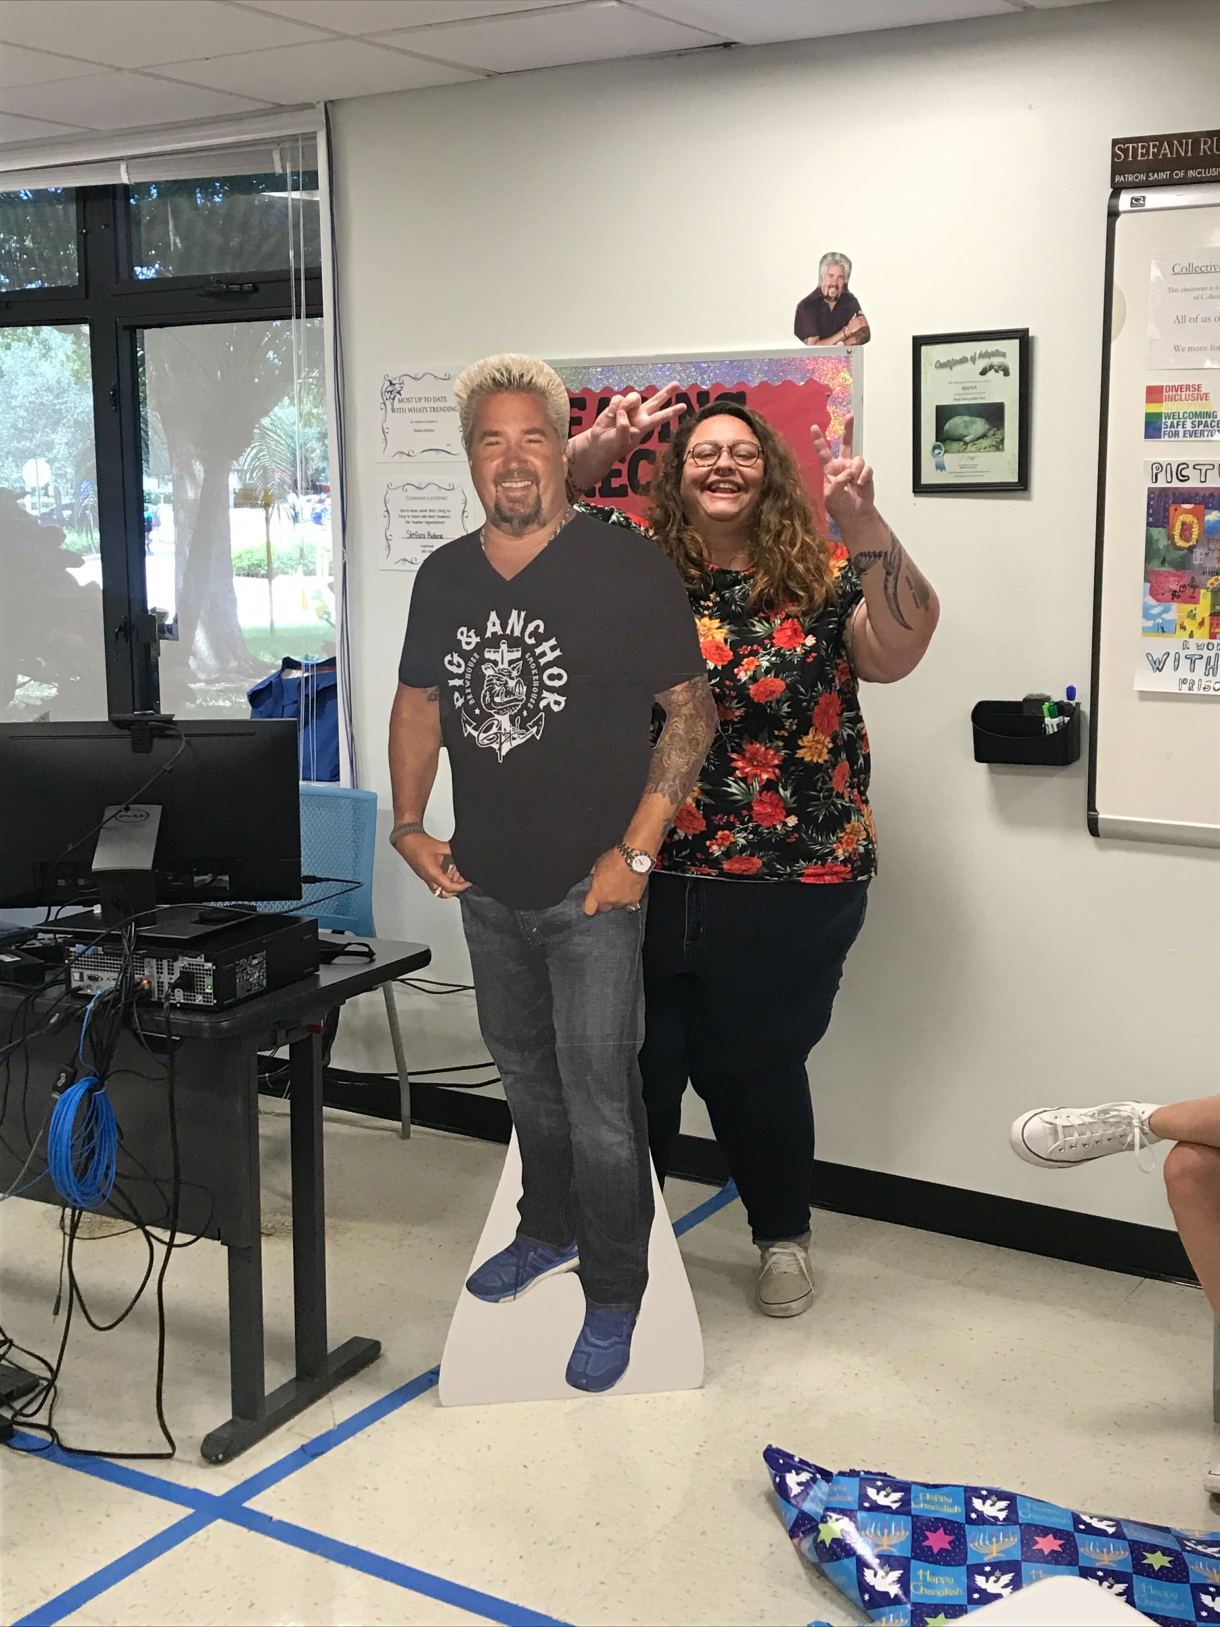 Here Stef stands behind a cardboard cutout of Guy Fieri holding up the V for victory sign with each hand. Stef is wearing a floral print shirt, jeans, sneakers and glasses and is in a classroom. A tiny cutout of guy fieri also peeks out from atop a bulletin board.